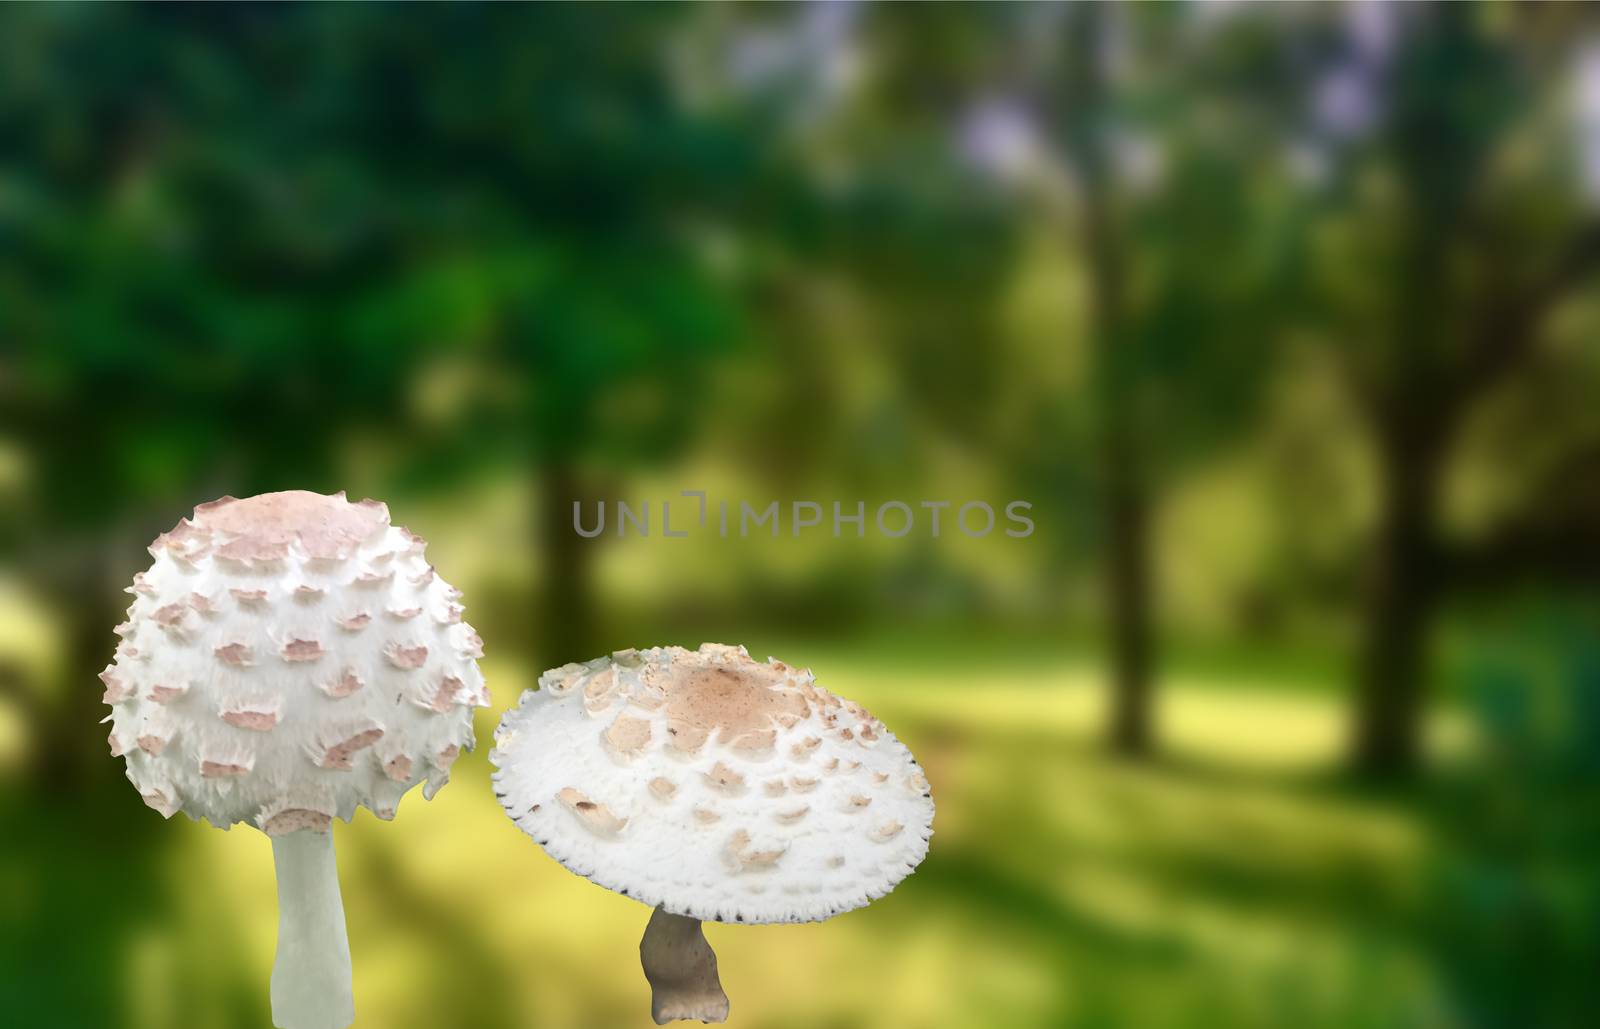  Poisonous mushrooms white fly agaric by Margolana